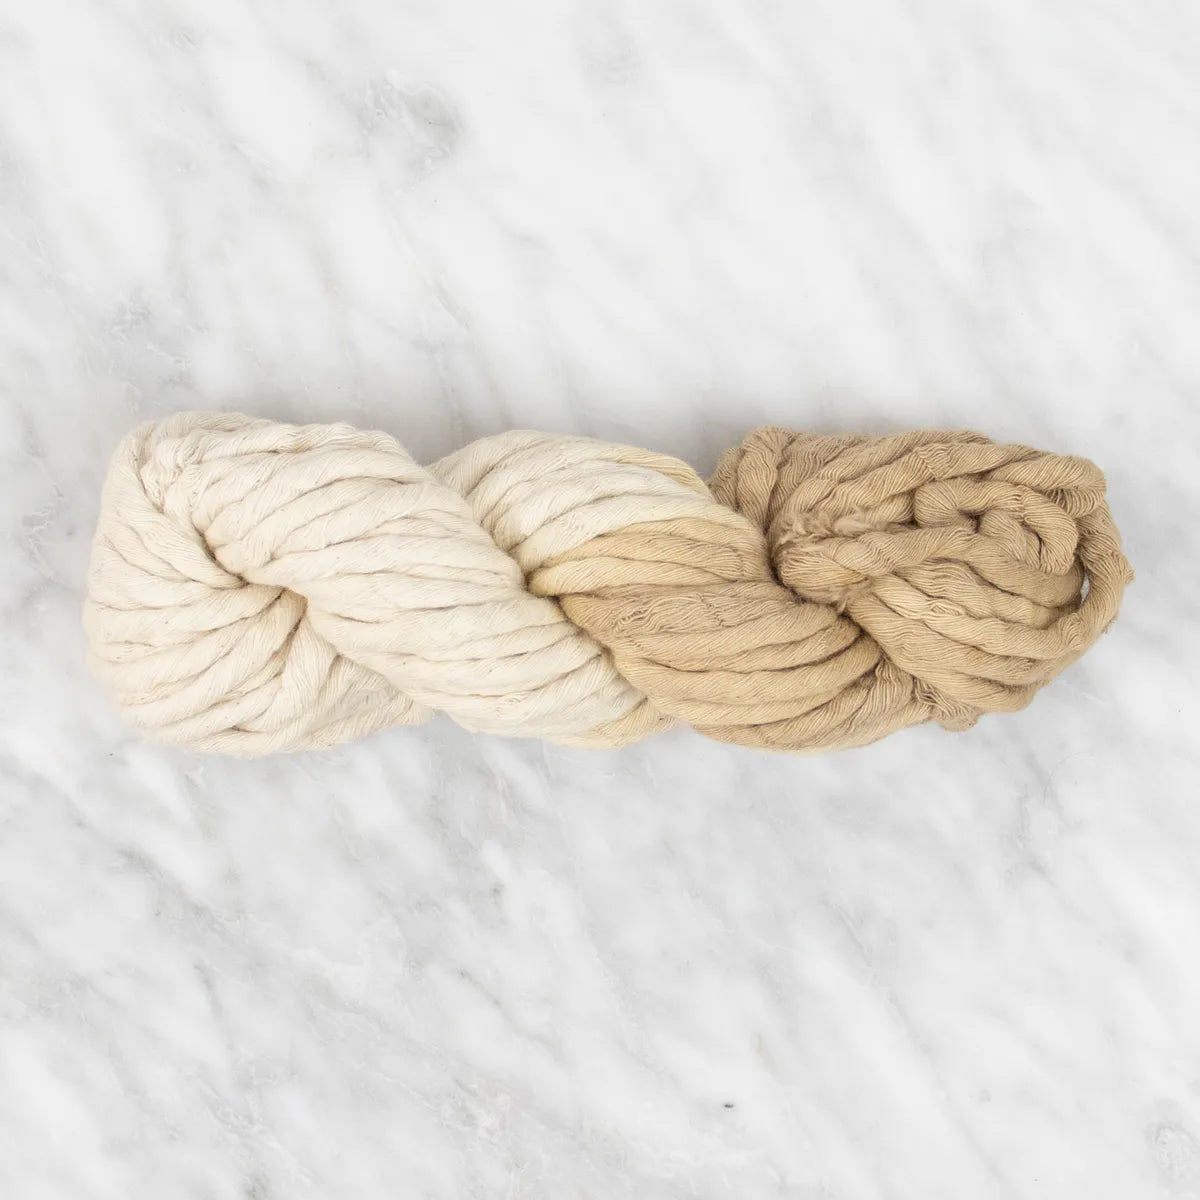 5mm Dip-Dyed Cotton String - Sand - 100 grams